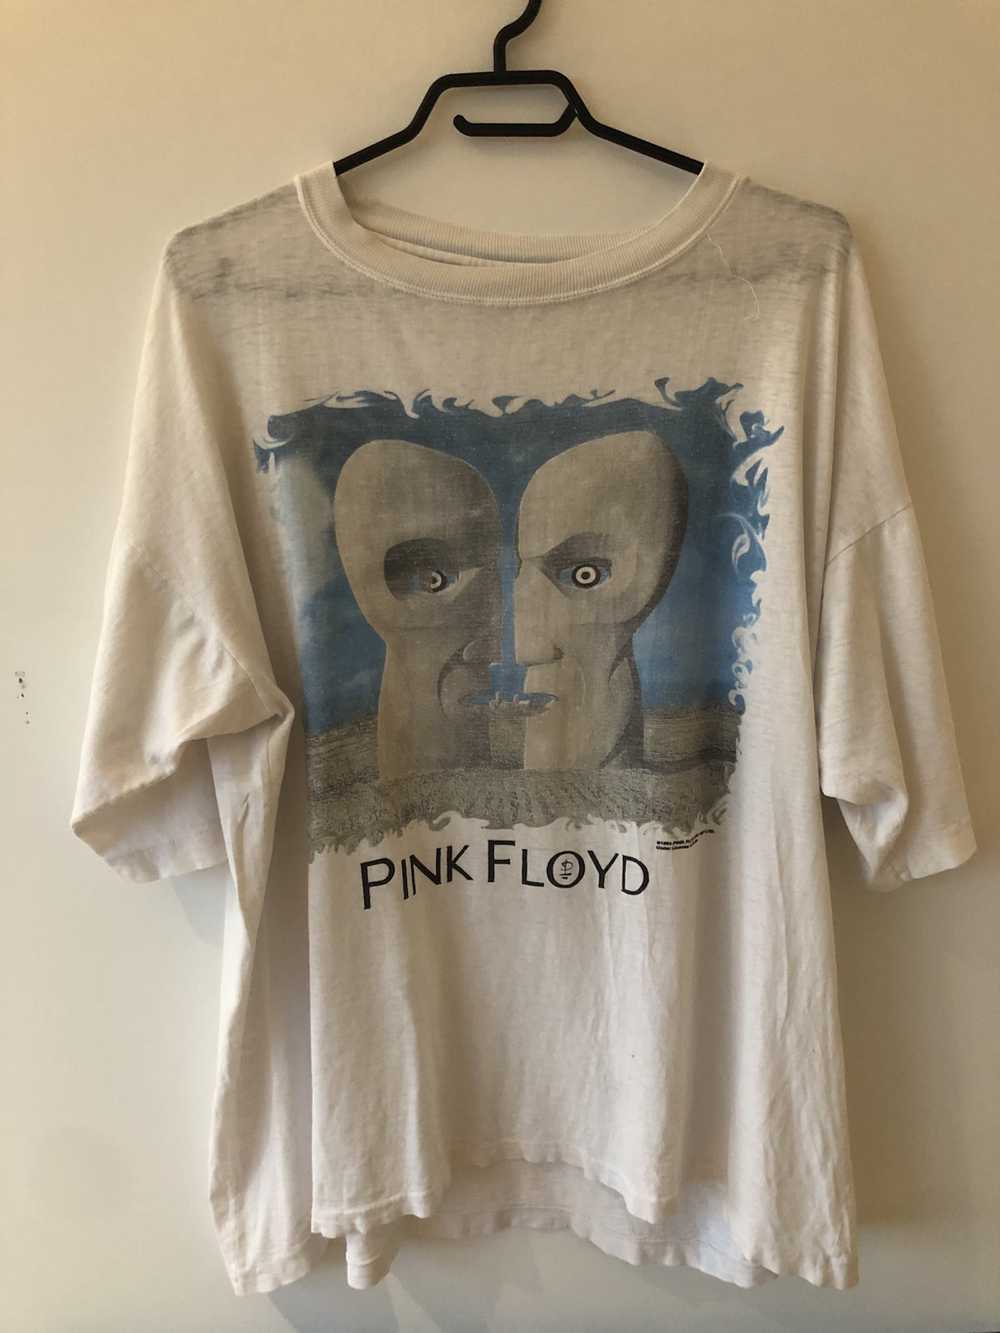 Band Tees × Vintage 1994 Pink Floyd ‘The Division… - image 1